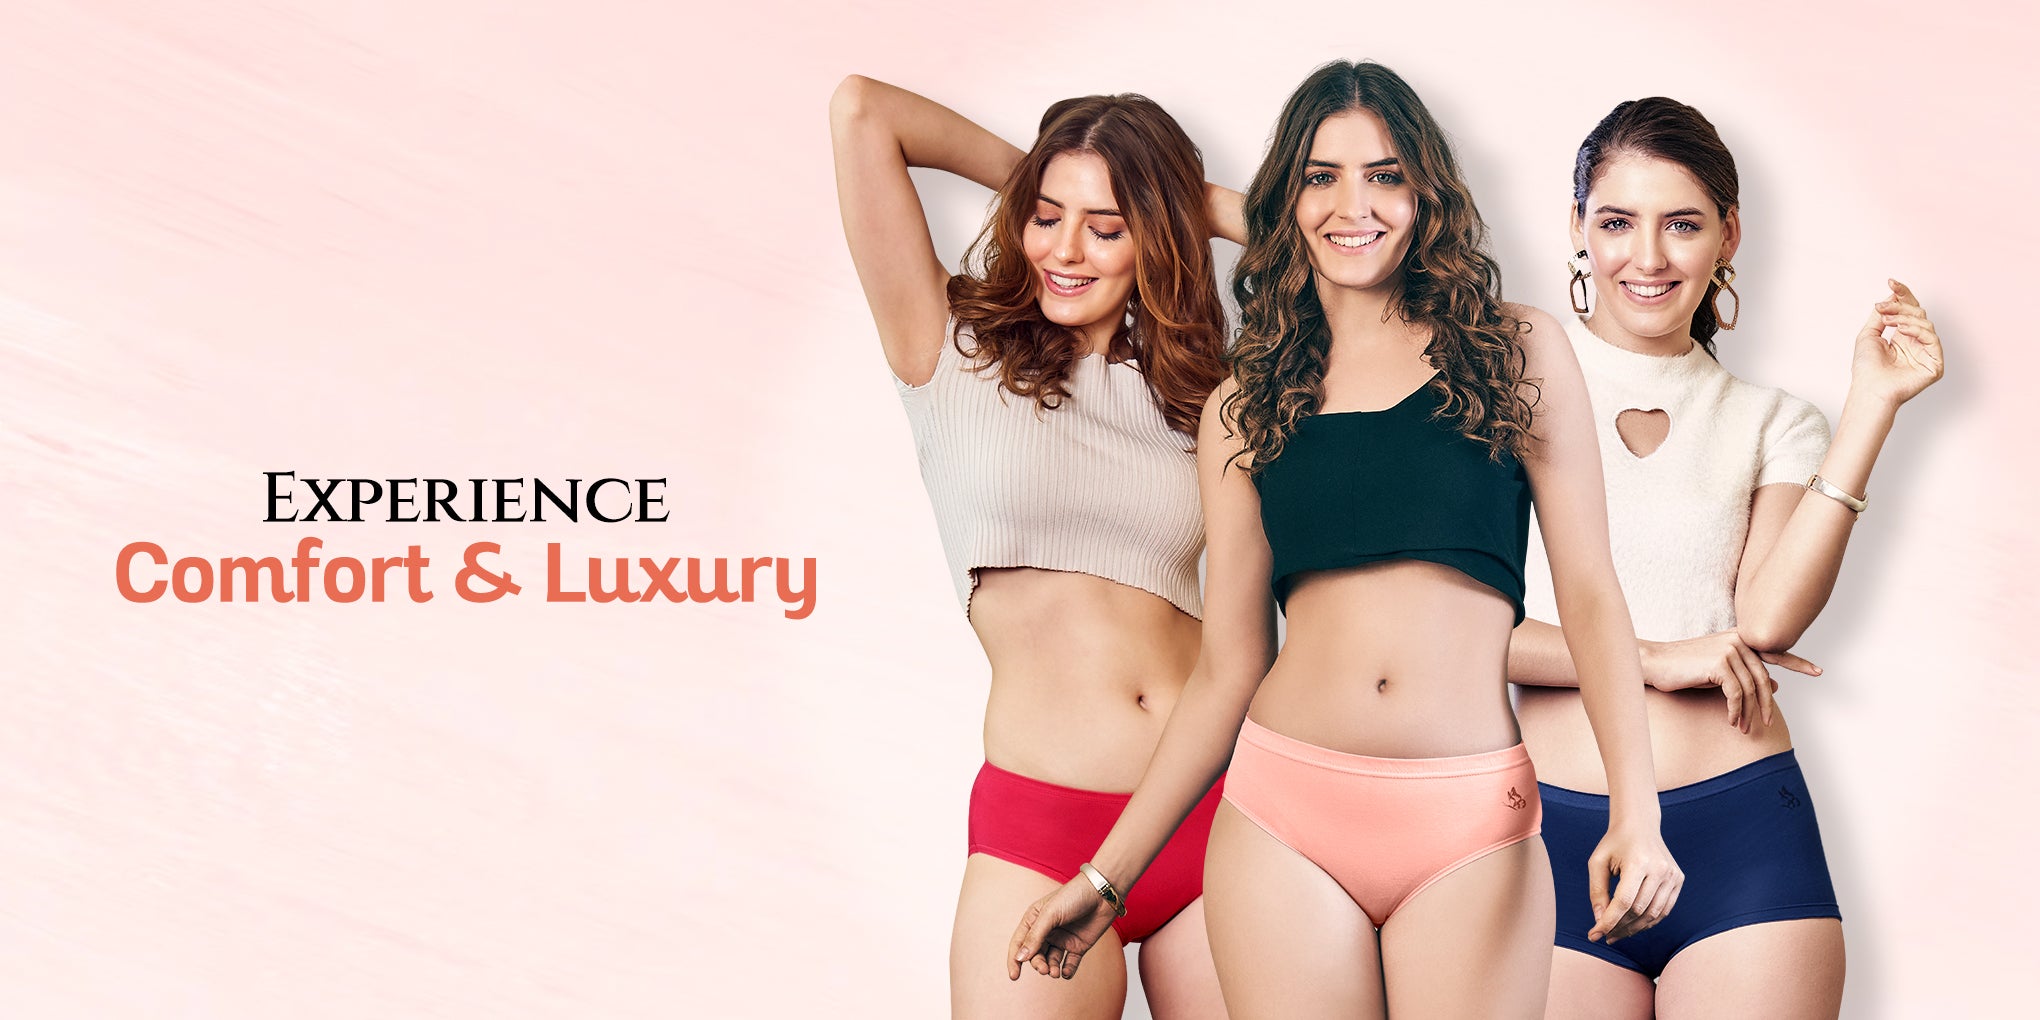 Why Do Women Indulge in Online Lingerie Shopping?